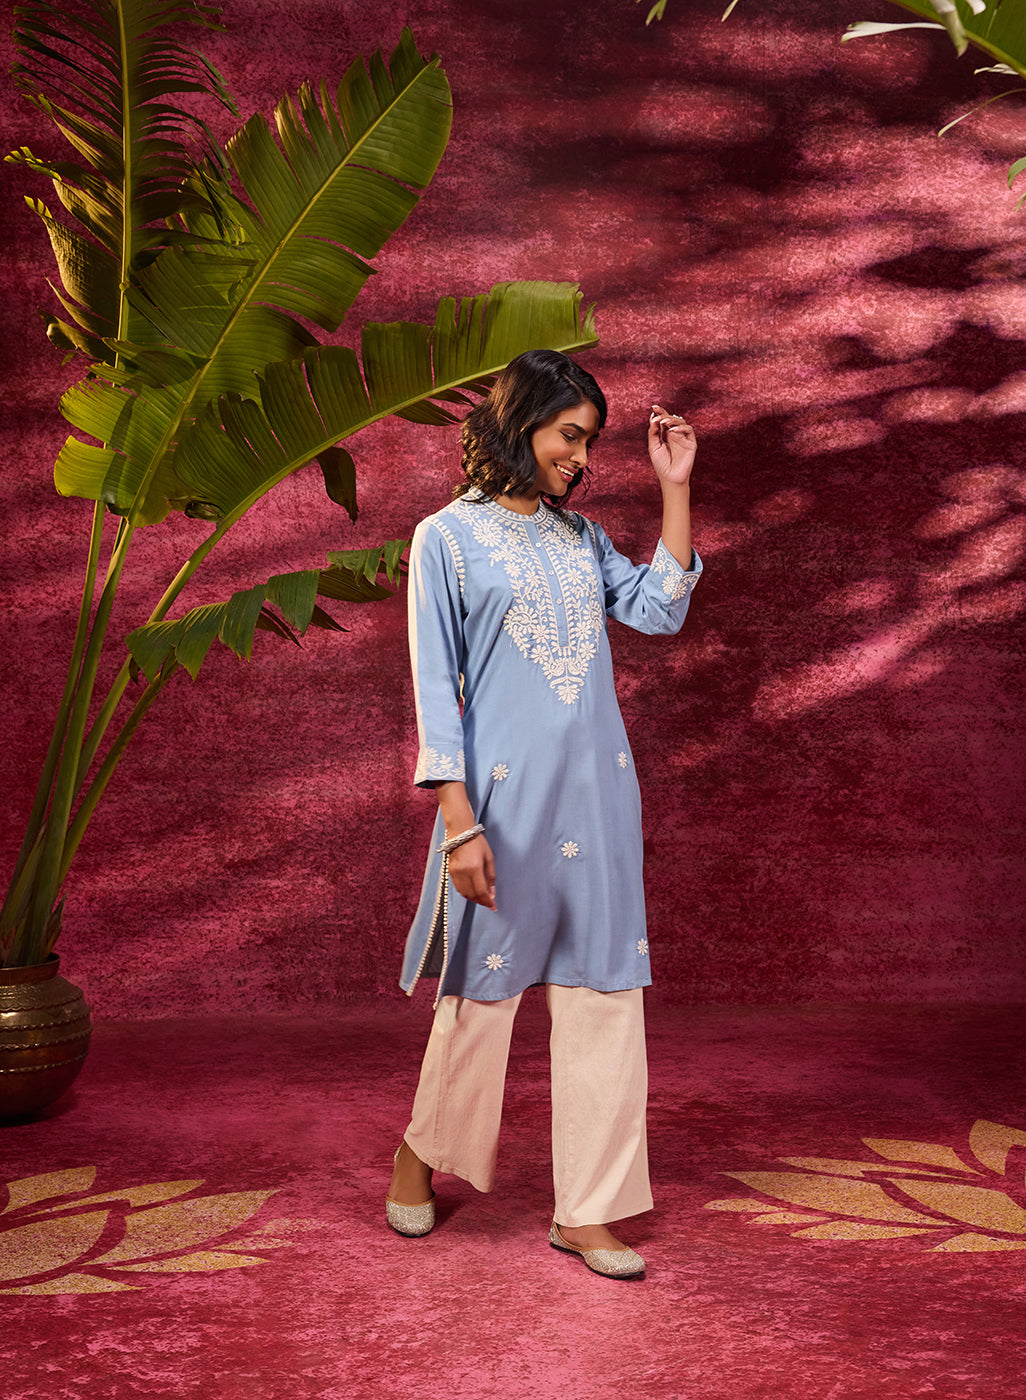 Saadgi Windy Blue Embroidered Cotton Linen Tunic for Women